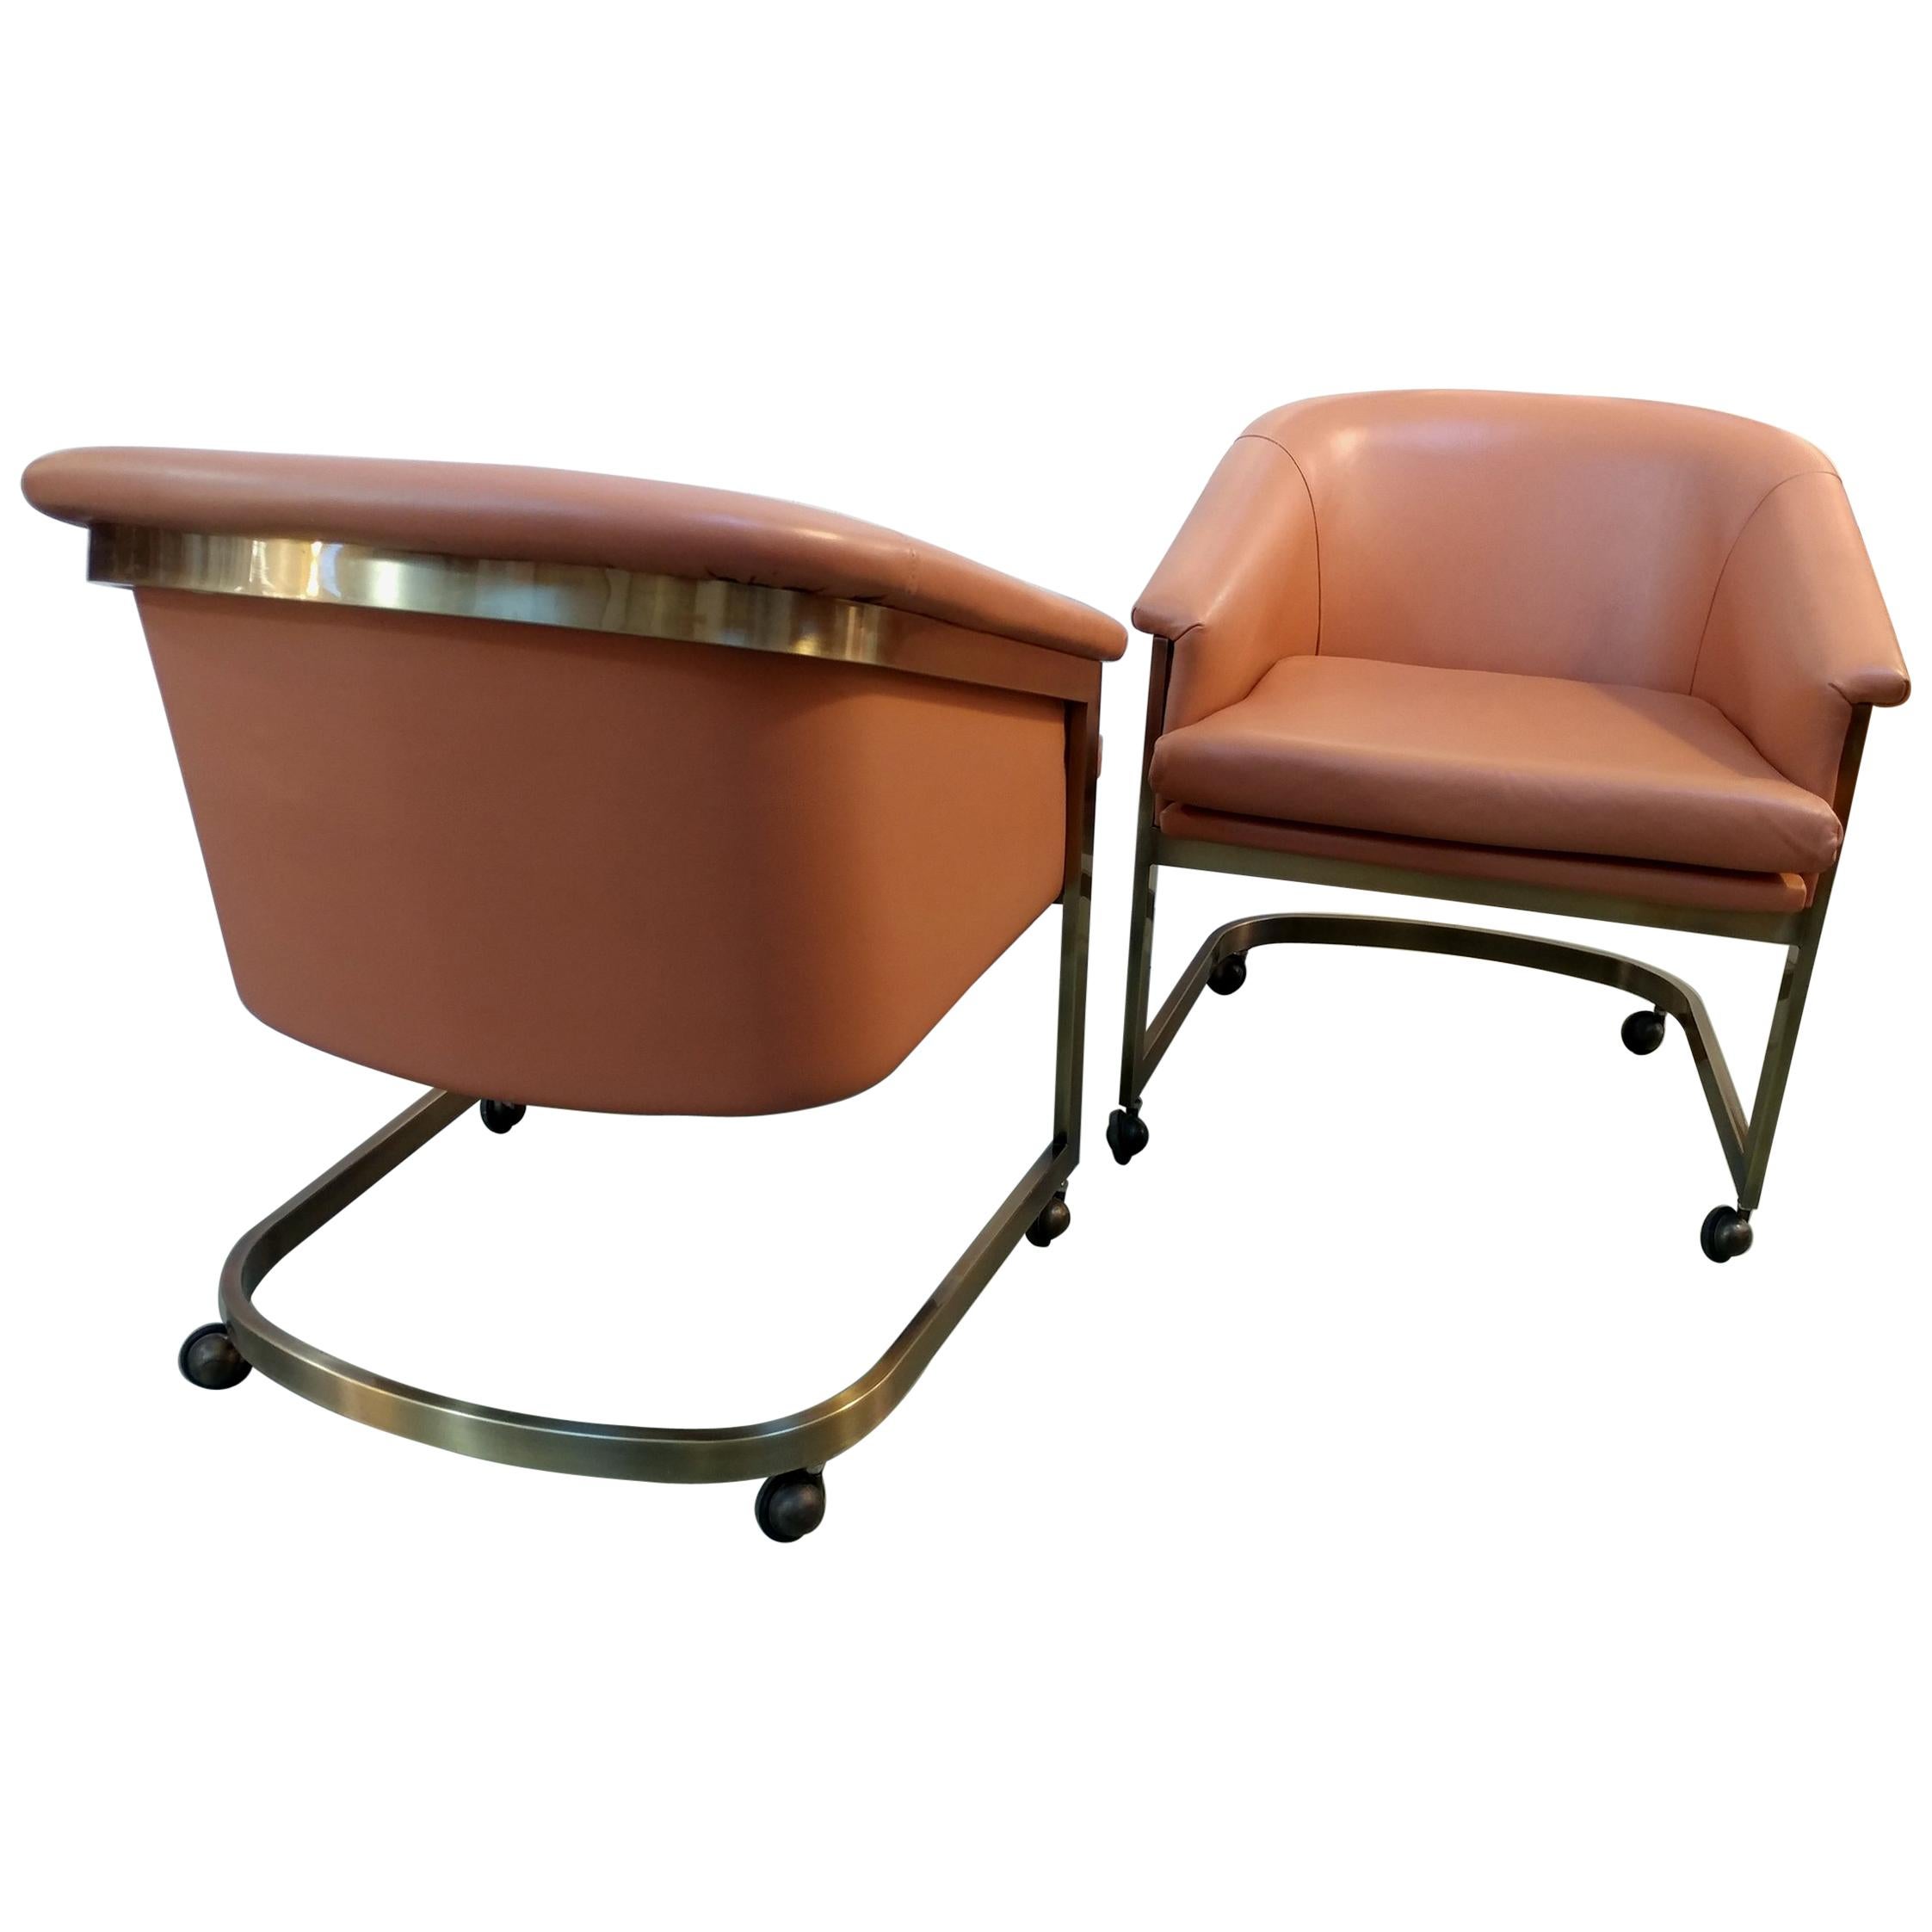 Pair of Milo Baughman for DIA Bronze Plated Leather Chairs, Offered by La Porte For Sale